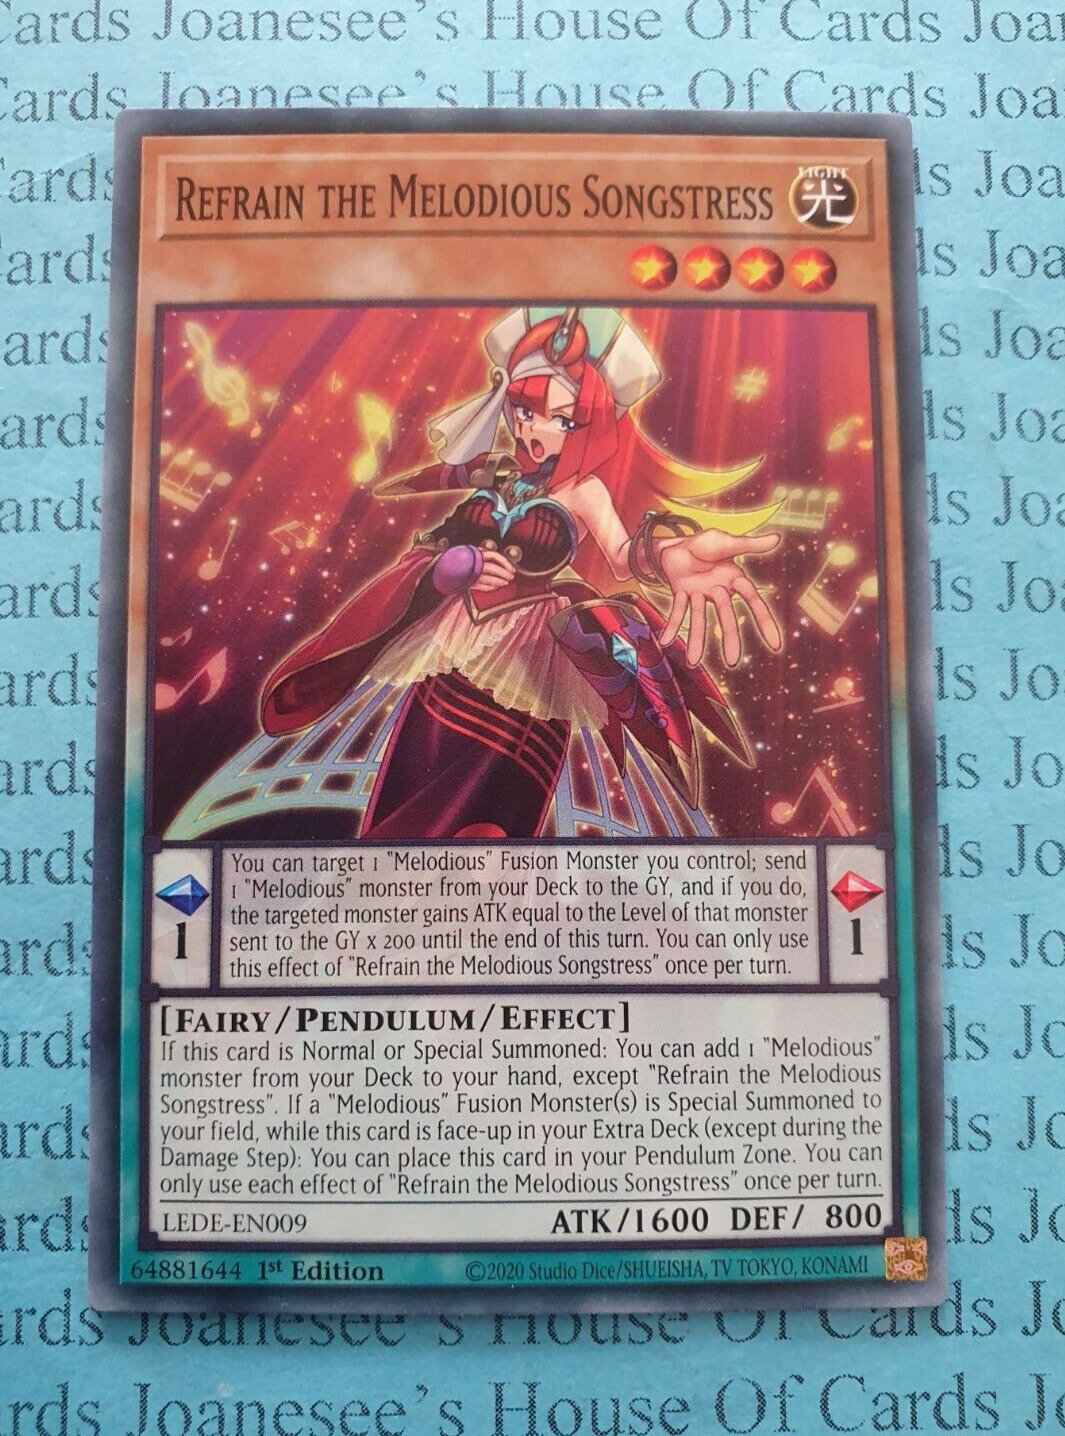 LEDE-EN009 Refrain the Melodious Songstress Yu-Gi-Oh Card 1st Edition New